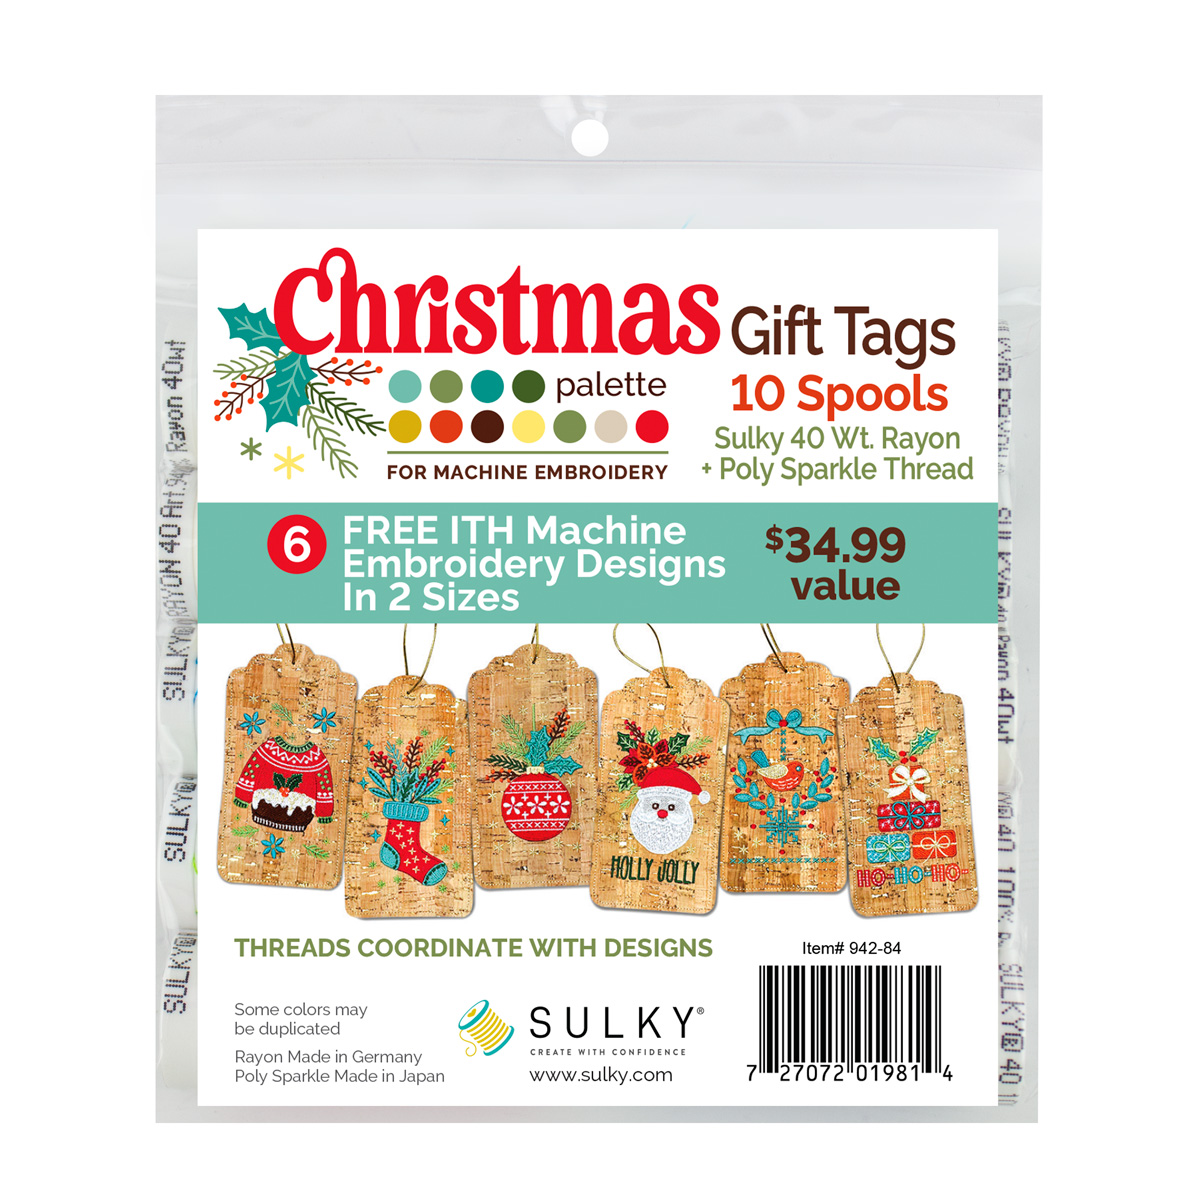 ITH Christmas Gift Tags Machine Embroidery Palette - 10 Spools - 6 Designs Questions & Answers